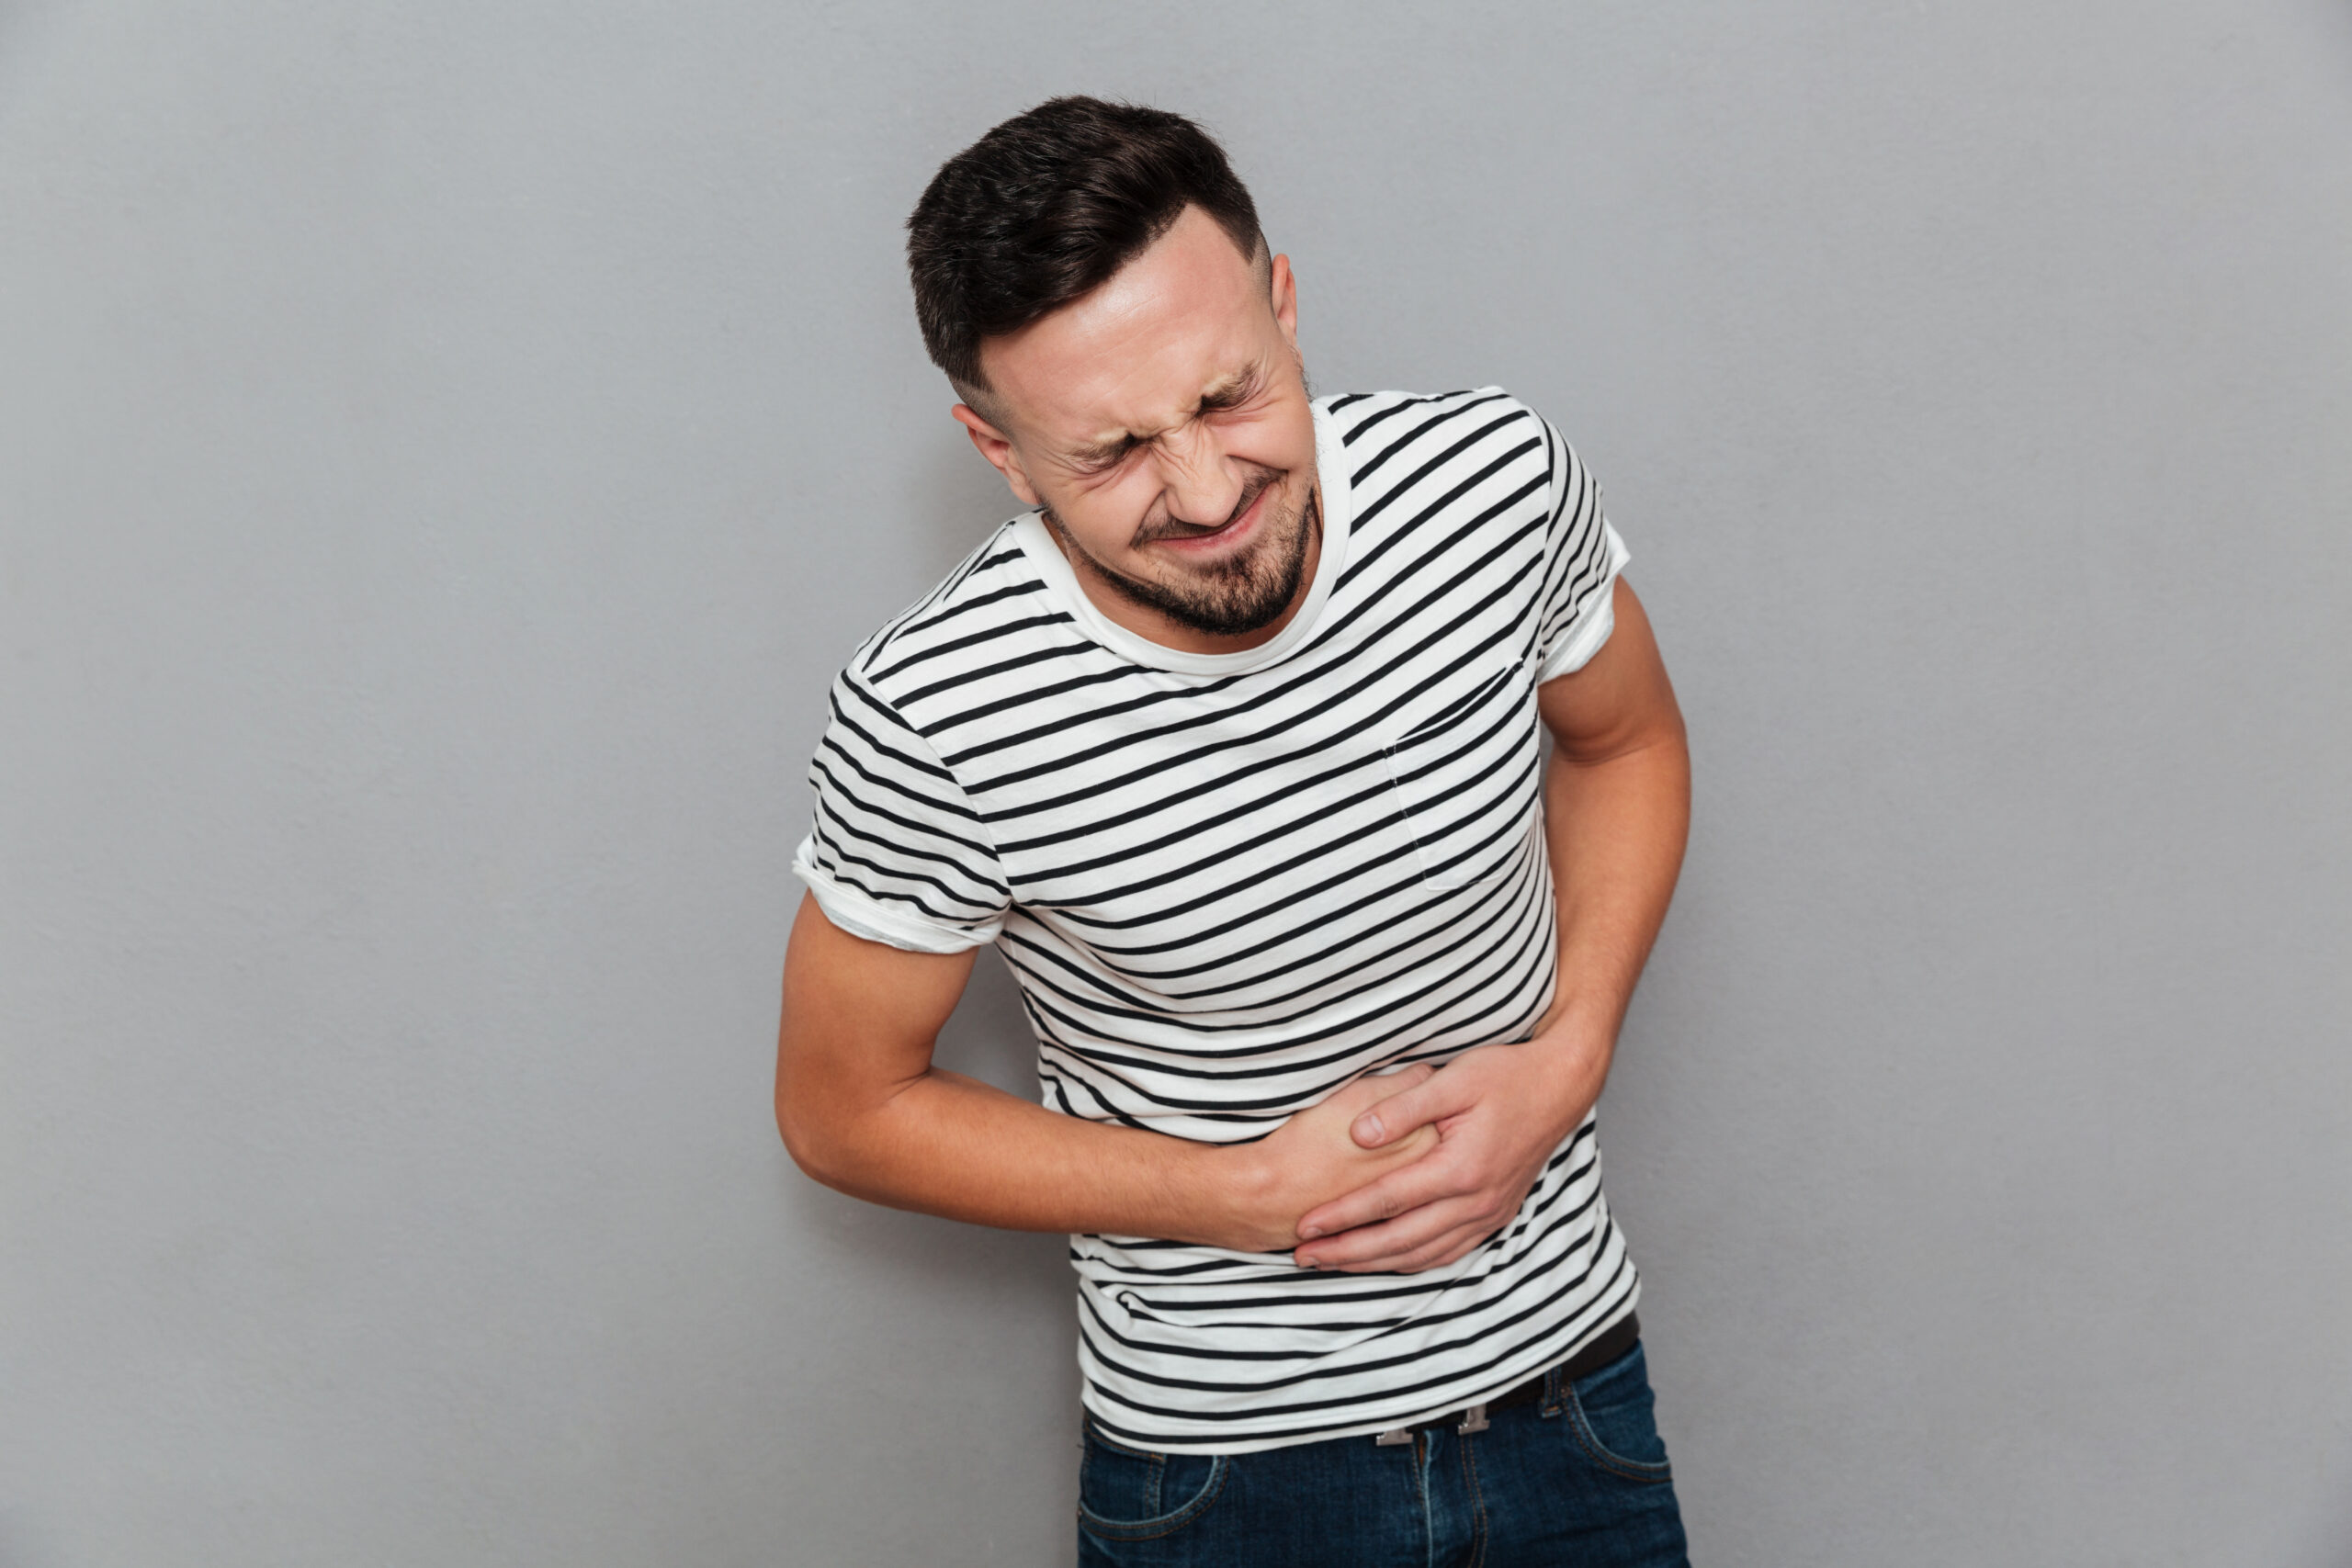 Gastroenterologist near me explains How to Keep Your Digestive System Healthy